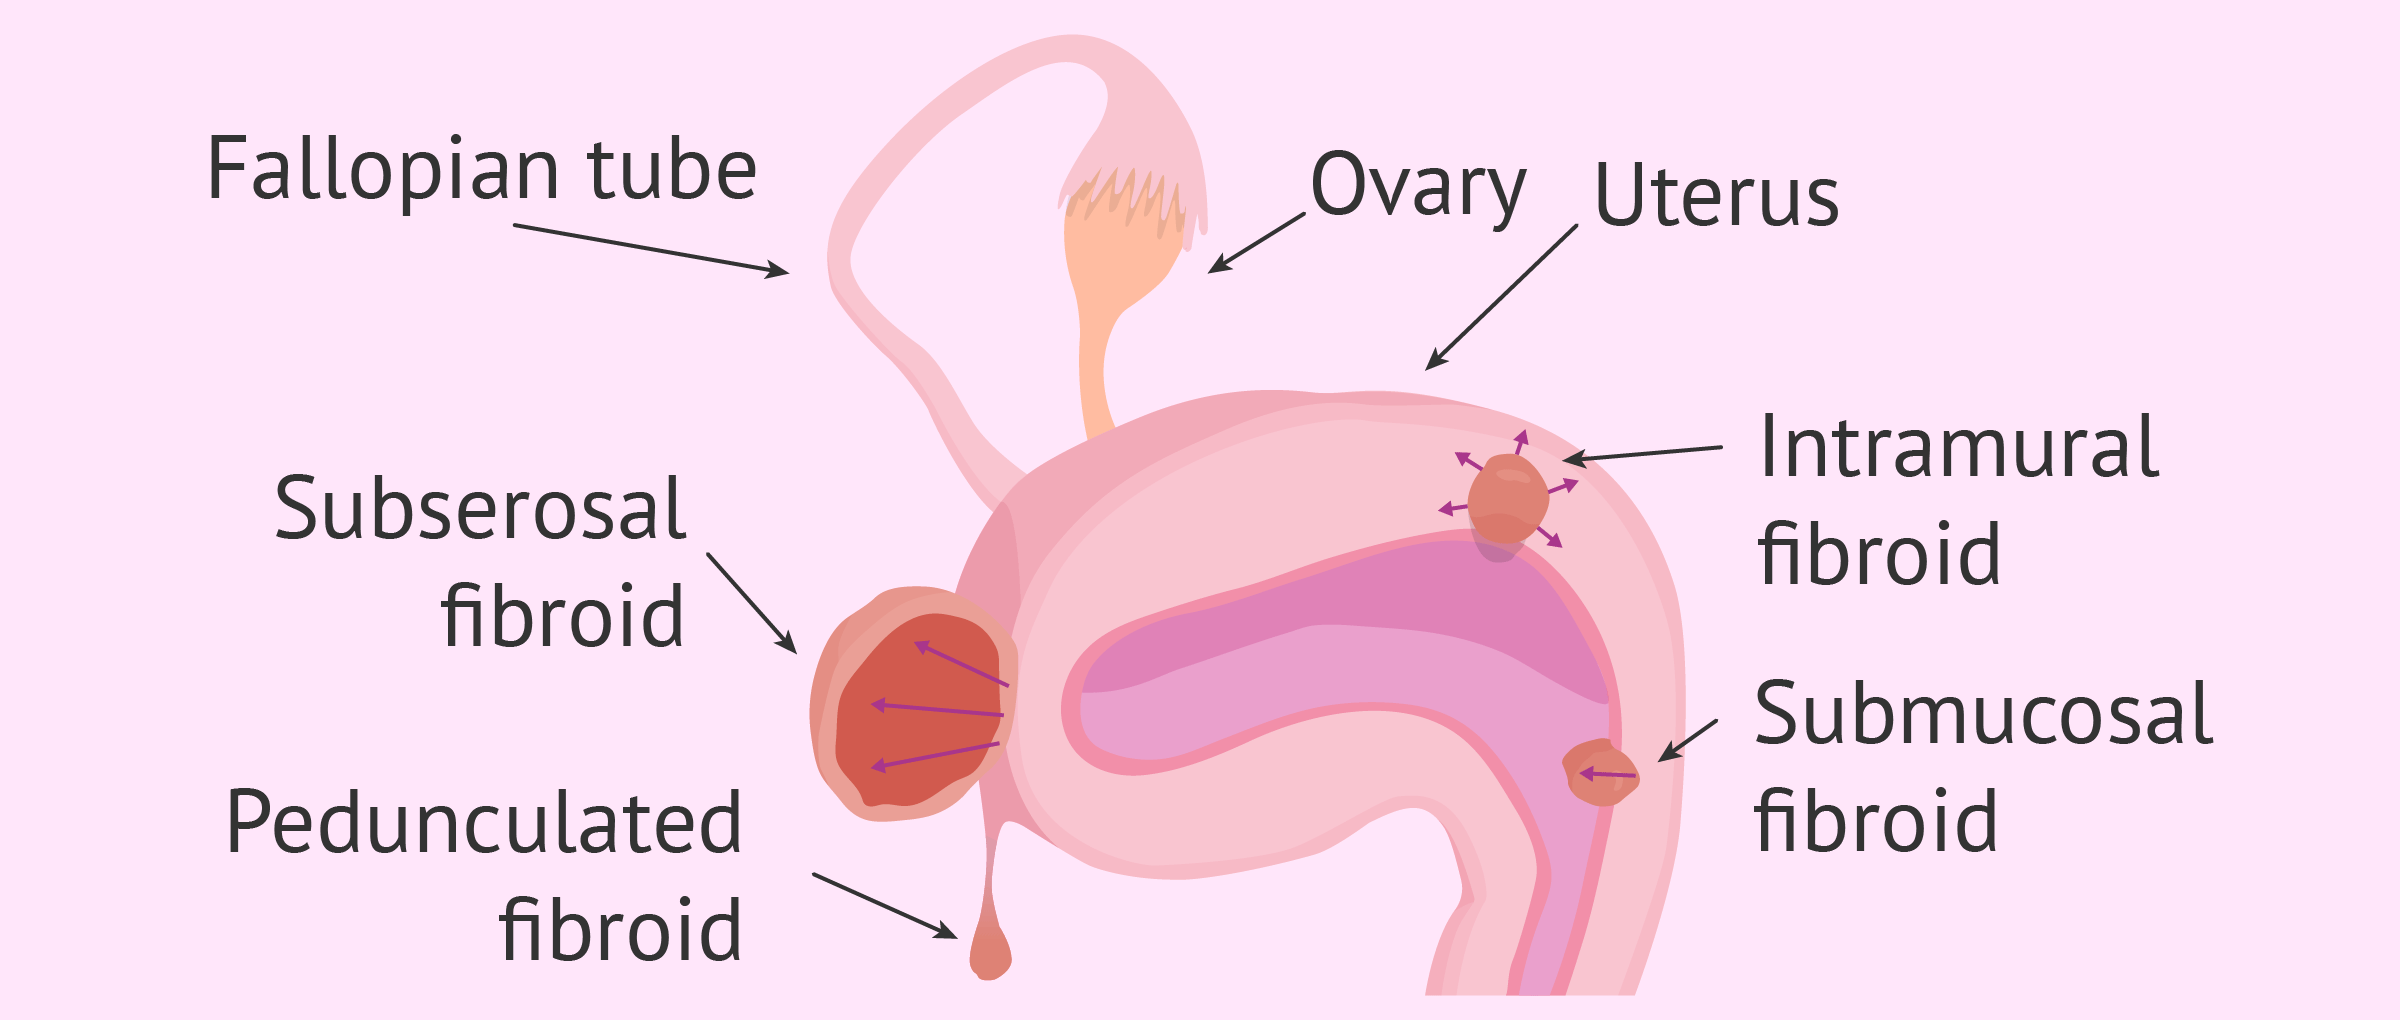 Localization of the different types of fibroids